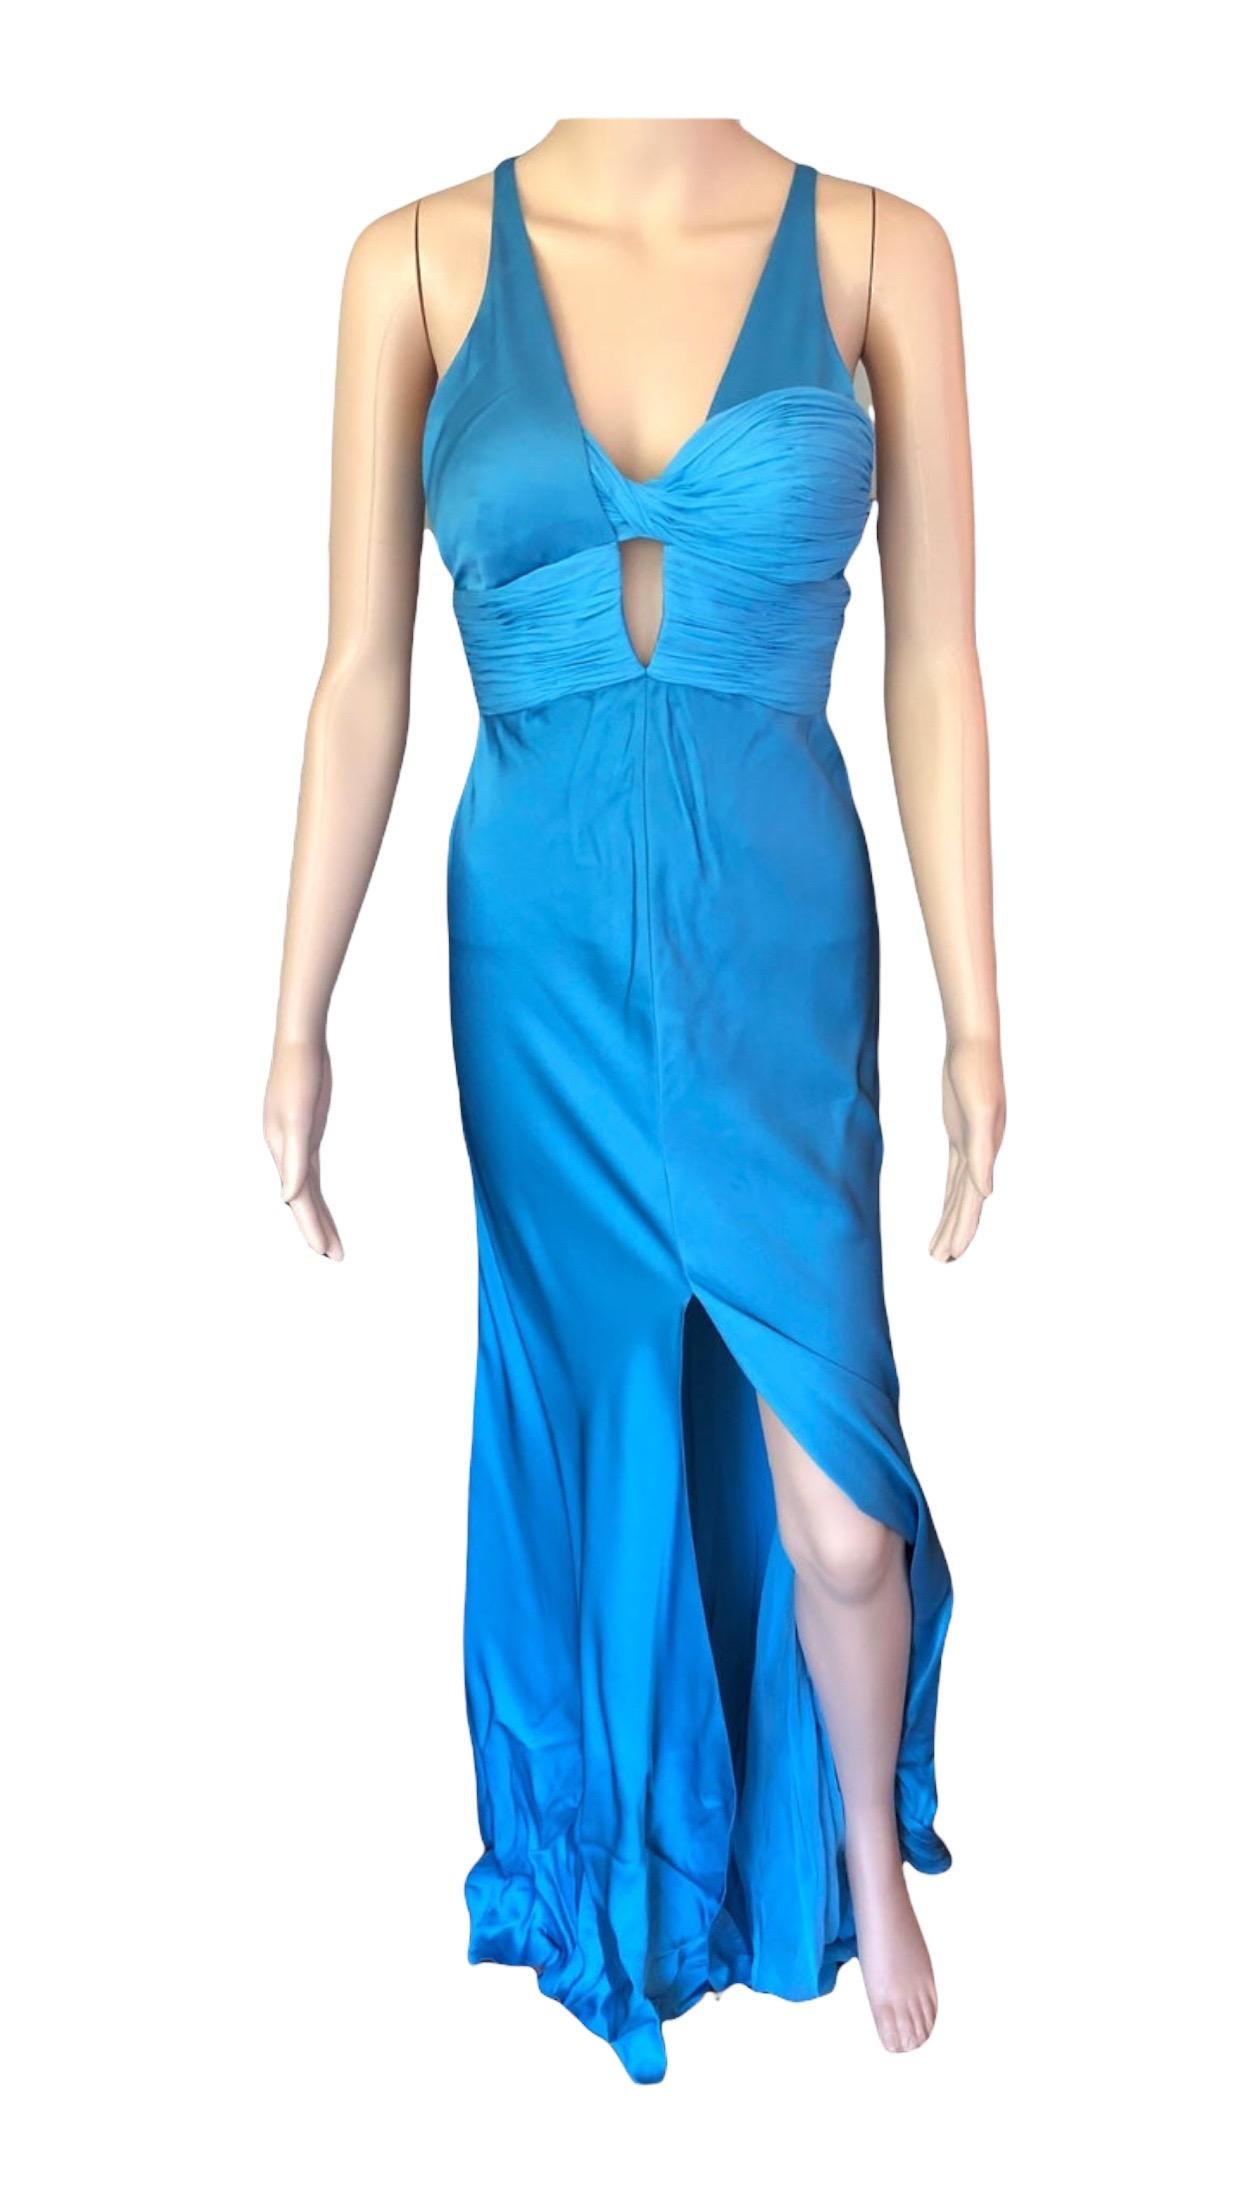 Versace S/S 2004 Bustier Open Back High Slit Blue Dress Gown For Sale 3